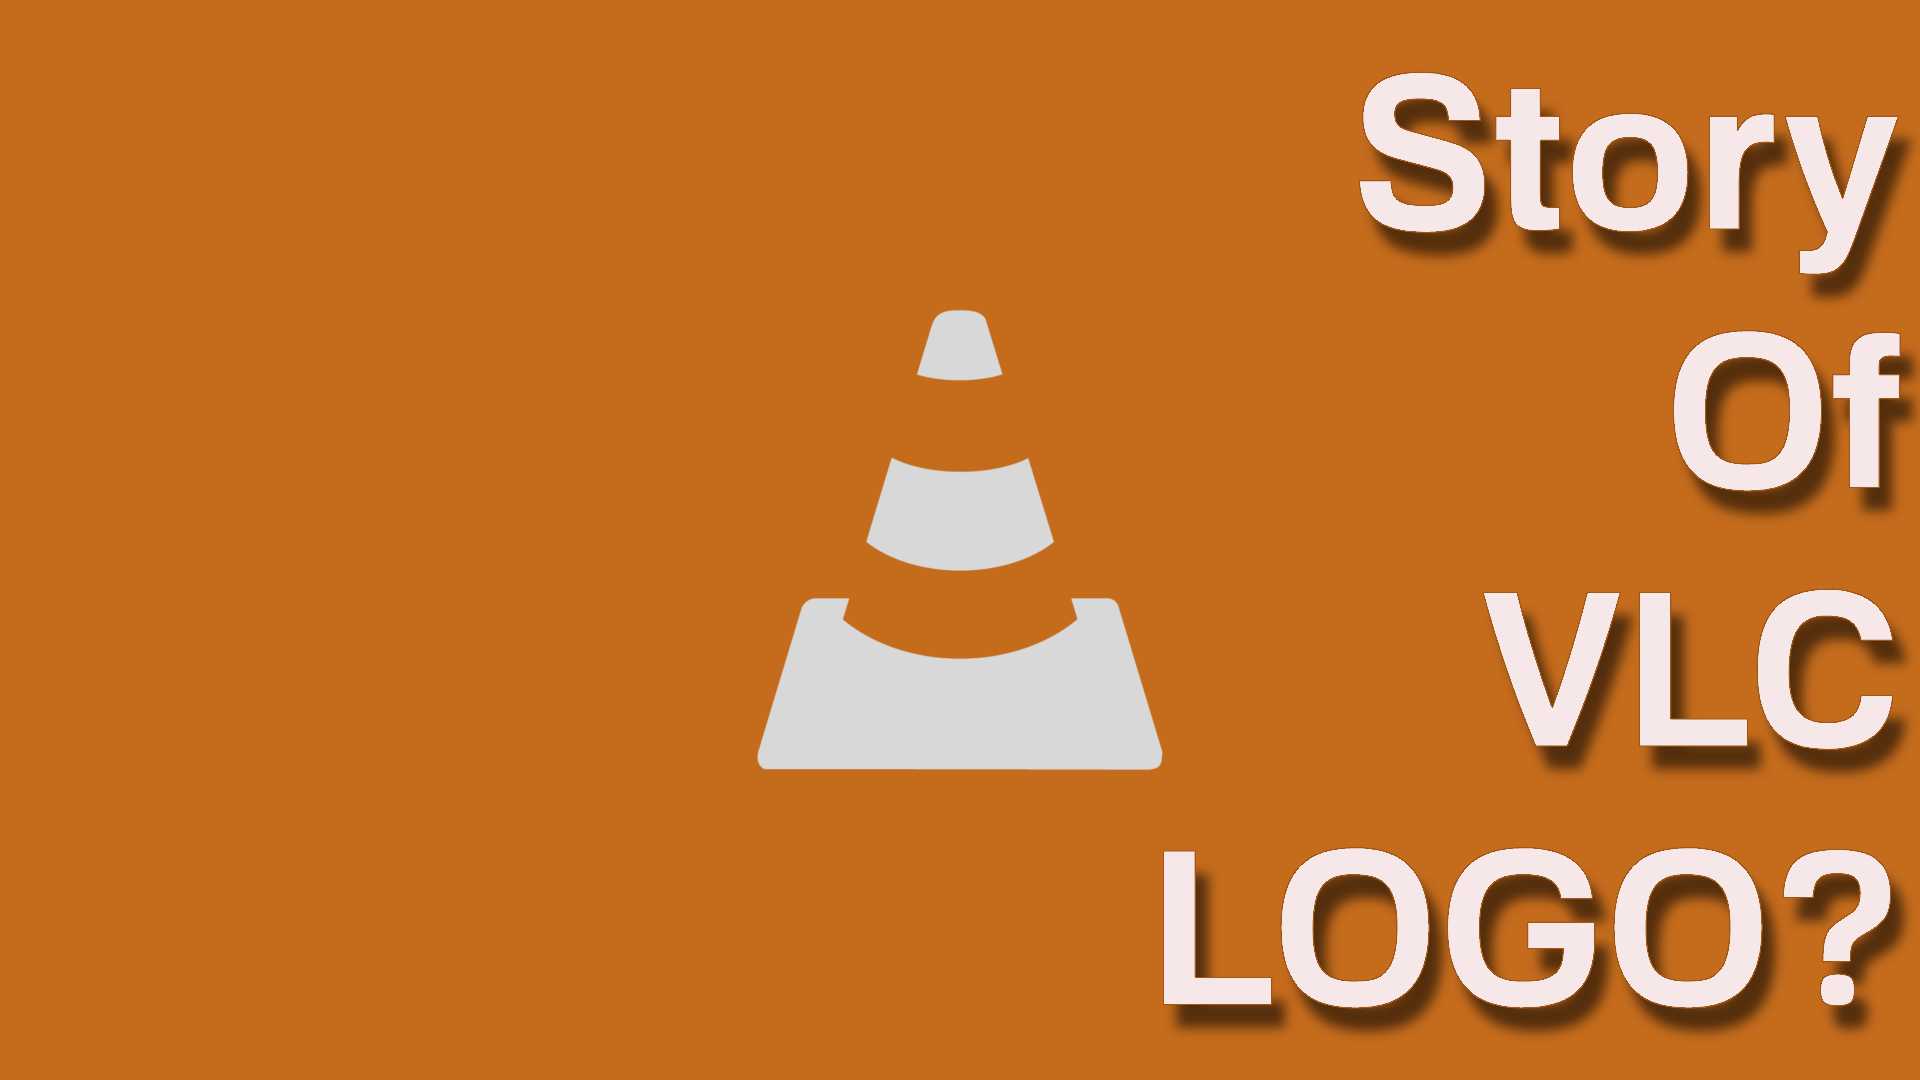 Traffic Cone Logo - Why VLC Player has a Traffic Cone as their logo? This story makes